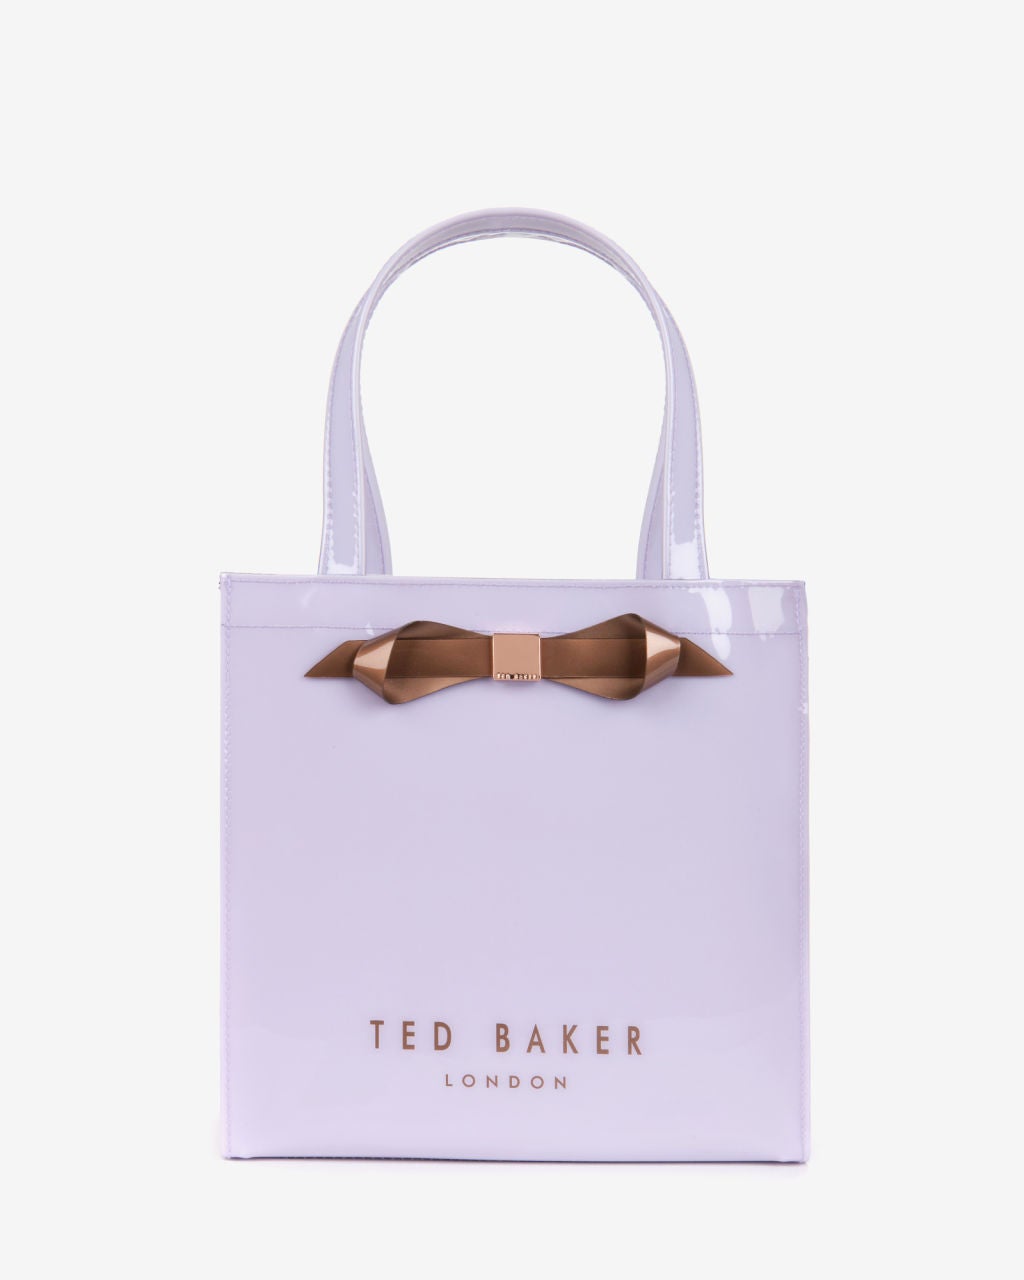 Fly From Head To Tote: 27 Hand-Picked Trendy Totes | Essence